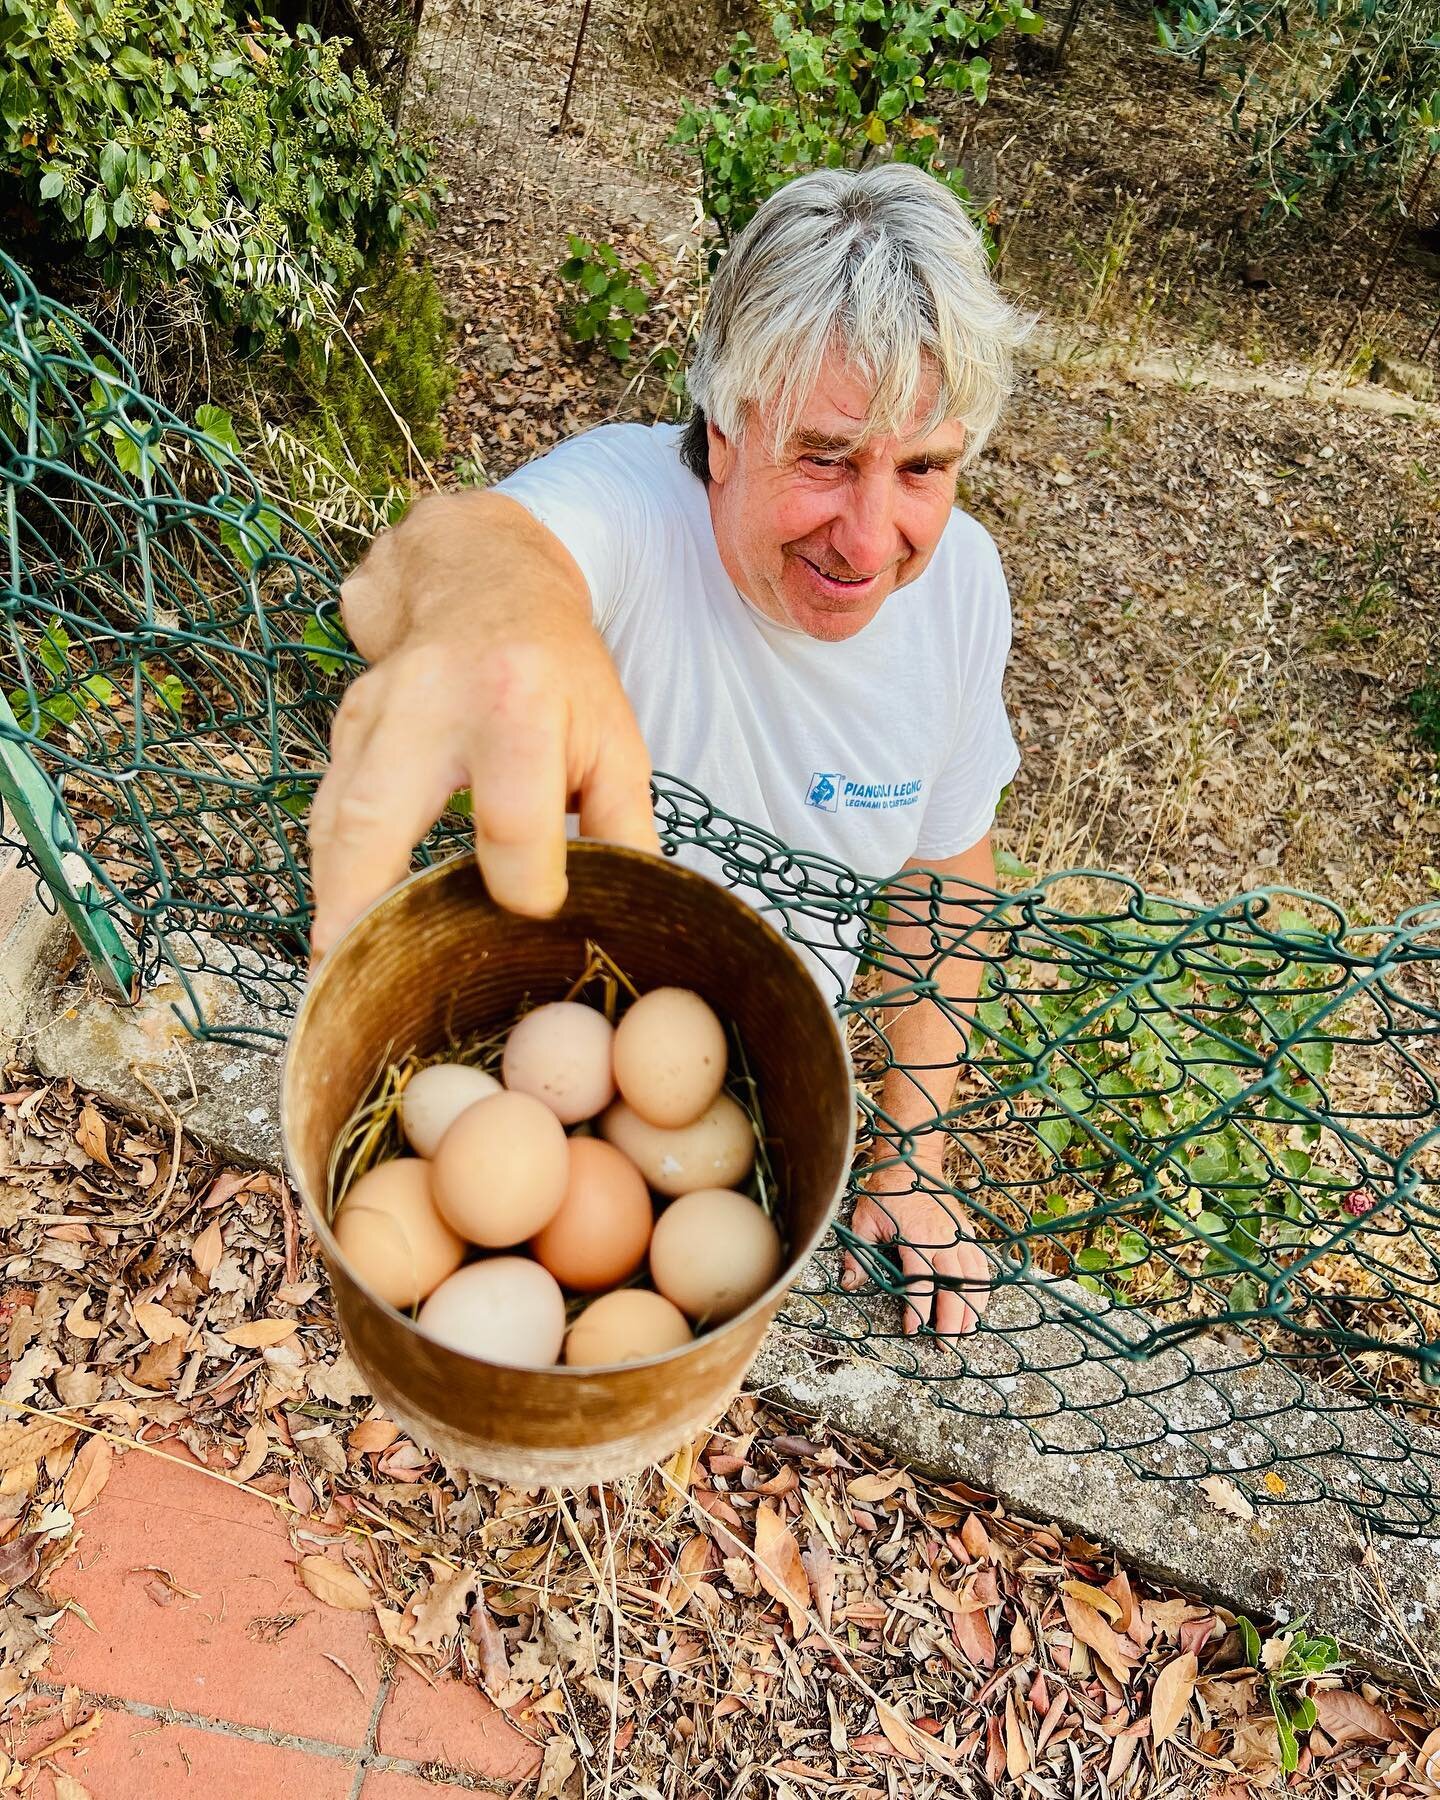 When our neighbor offers us fresh eggs from his chickens, we say SI GRAZIE! 🥰🥰🥰 This is Giorgio, a sweet man with a beautiful vegetable garden (which he always shares with us) and chickens. Oh I love having a farmhouse and great neighbors 🥰
.
We 